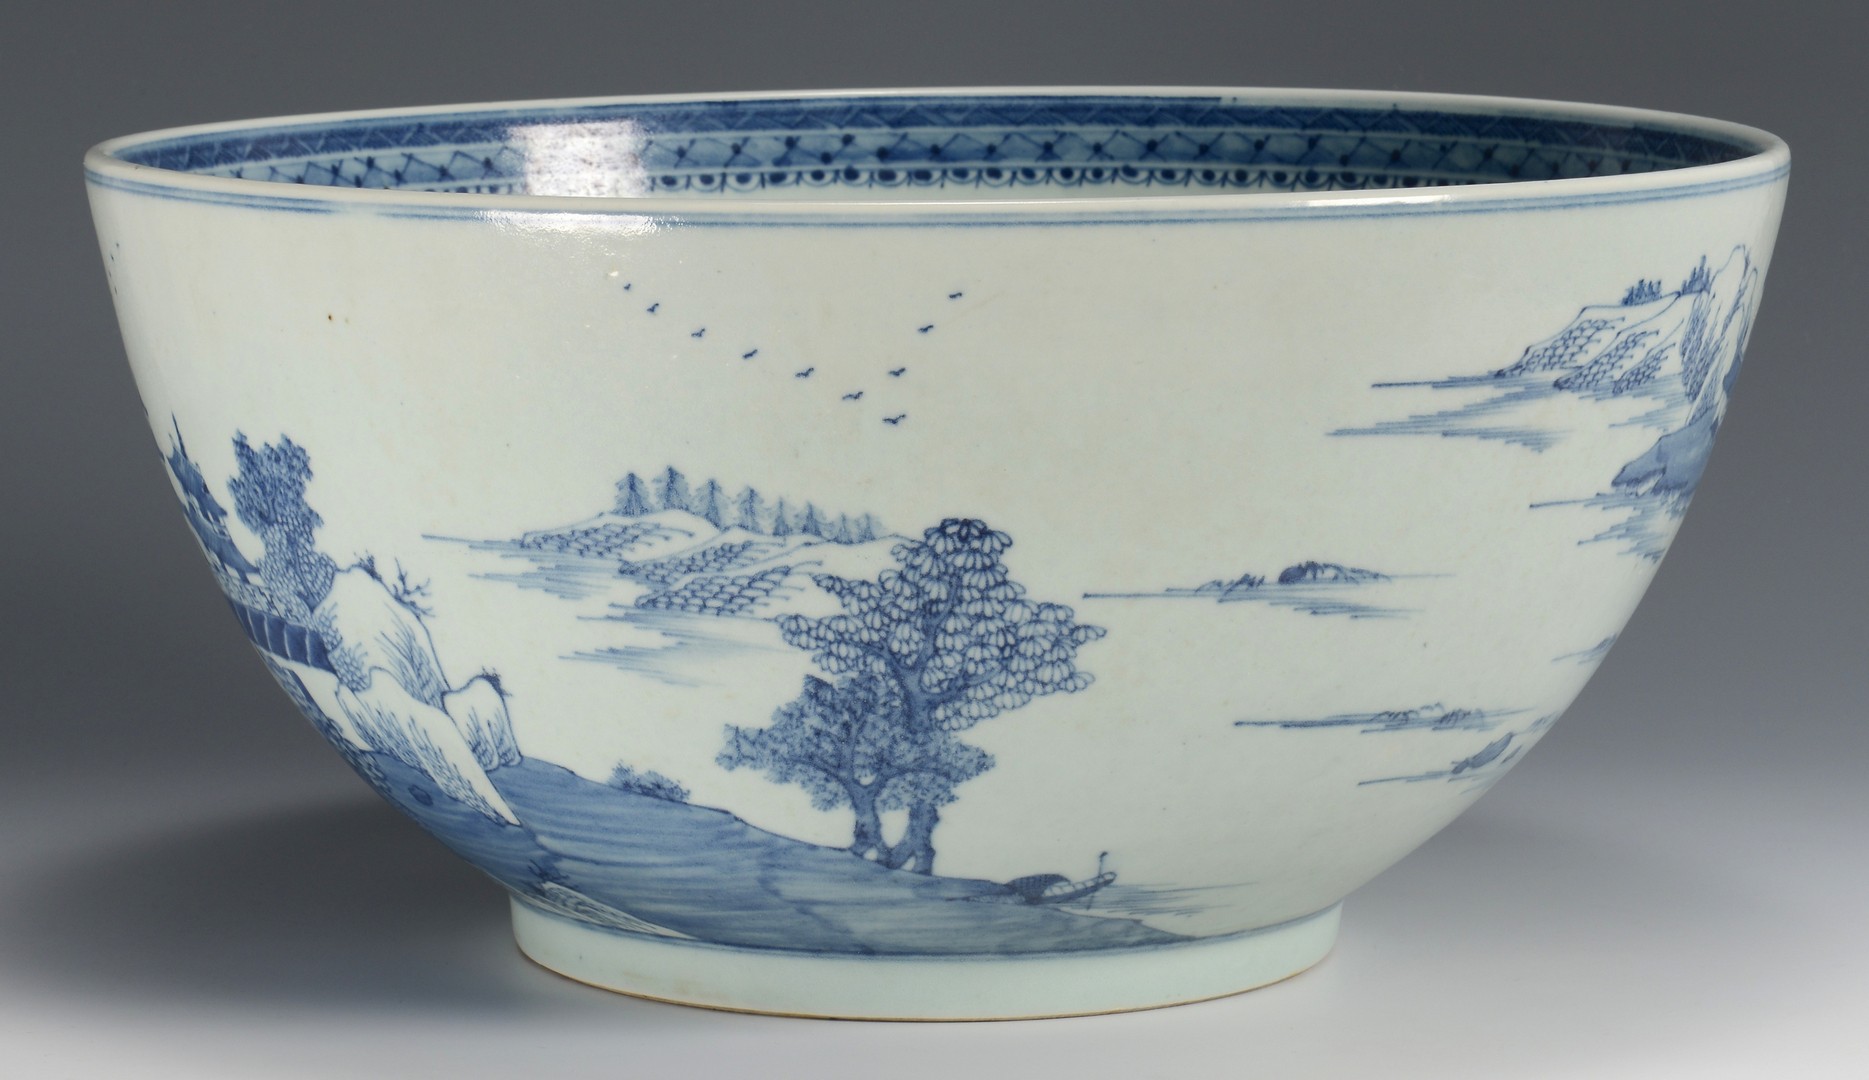 Lot 30: Large Chinese Export Porcelain Punch Bowl